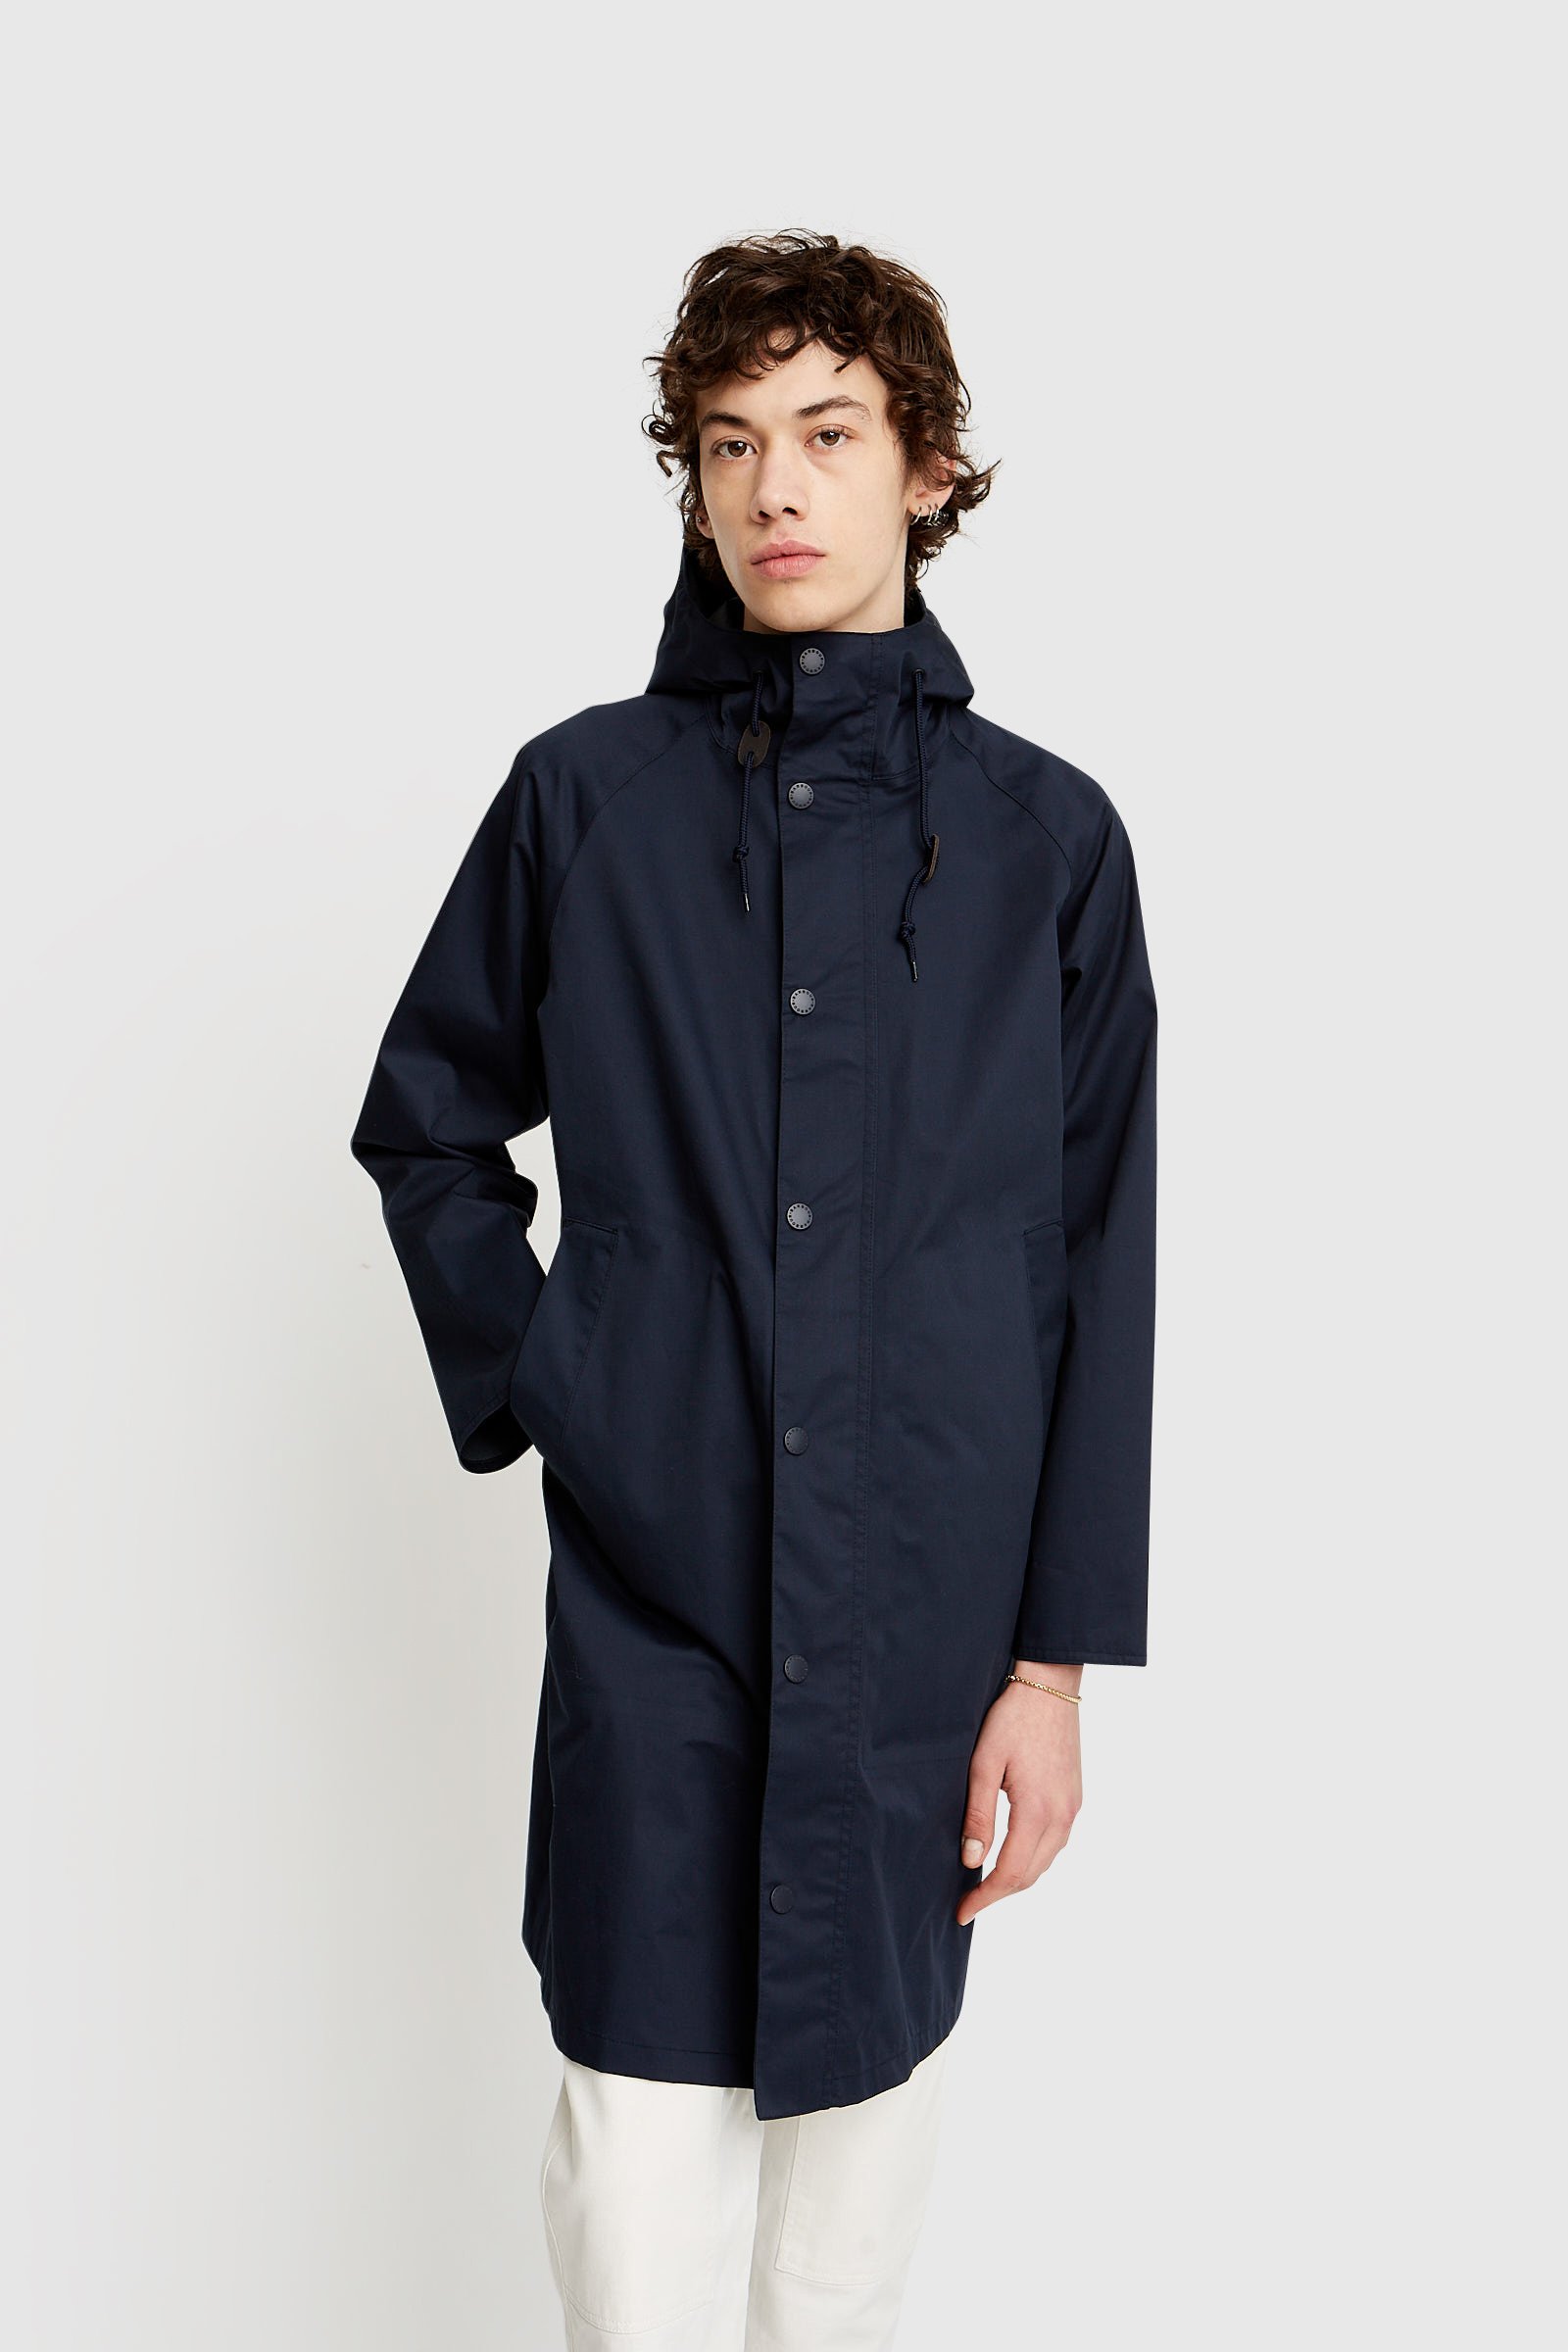 Barbour Hooded Hunting Jacket Navy | WoodWood.com